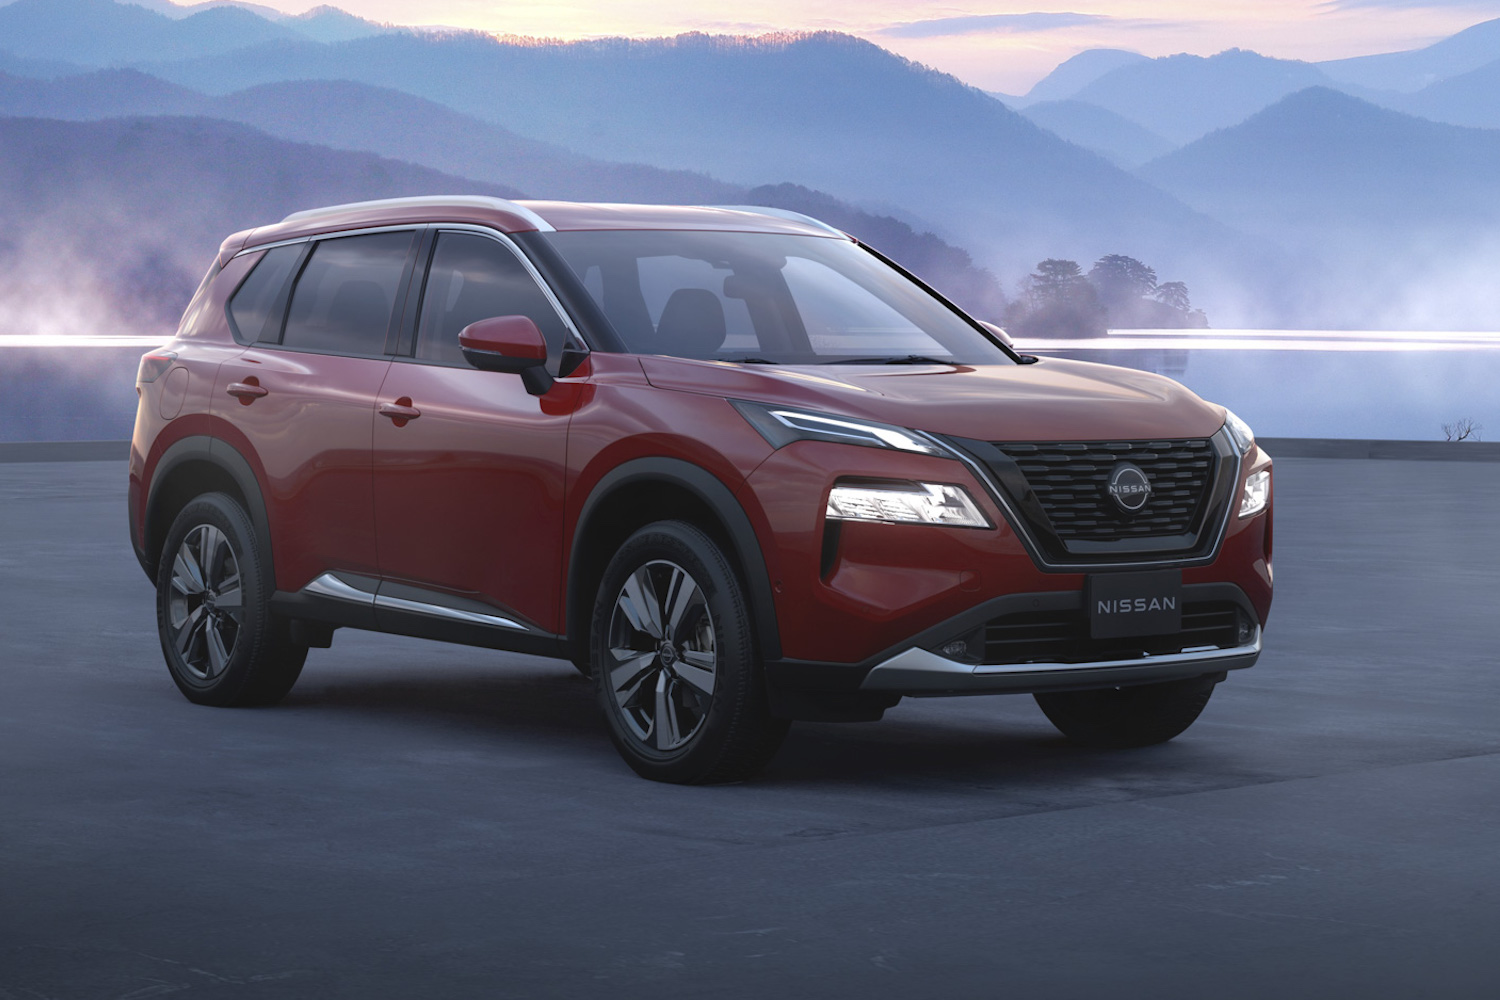 Car News | Nissan shows off new electrified X-Trail